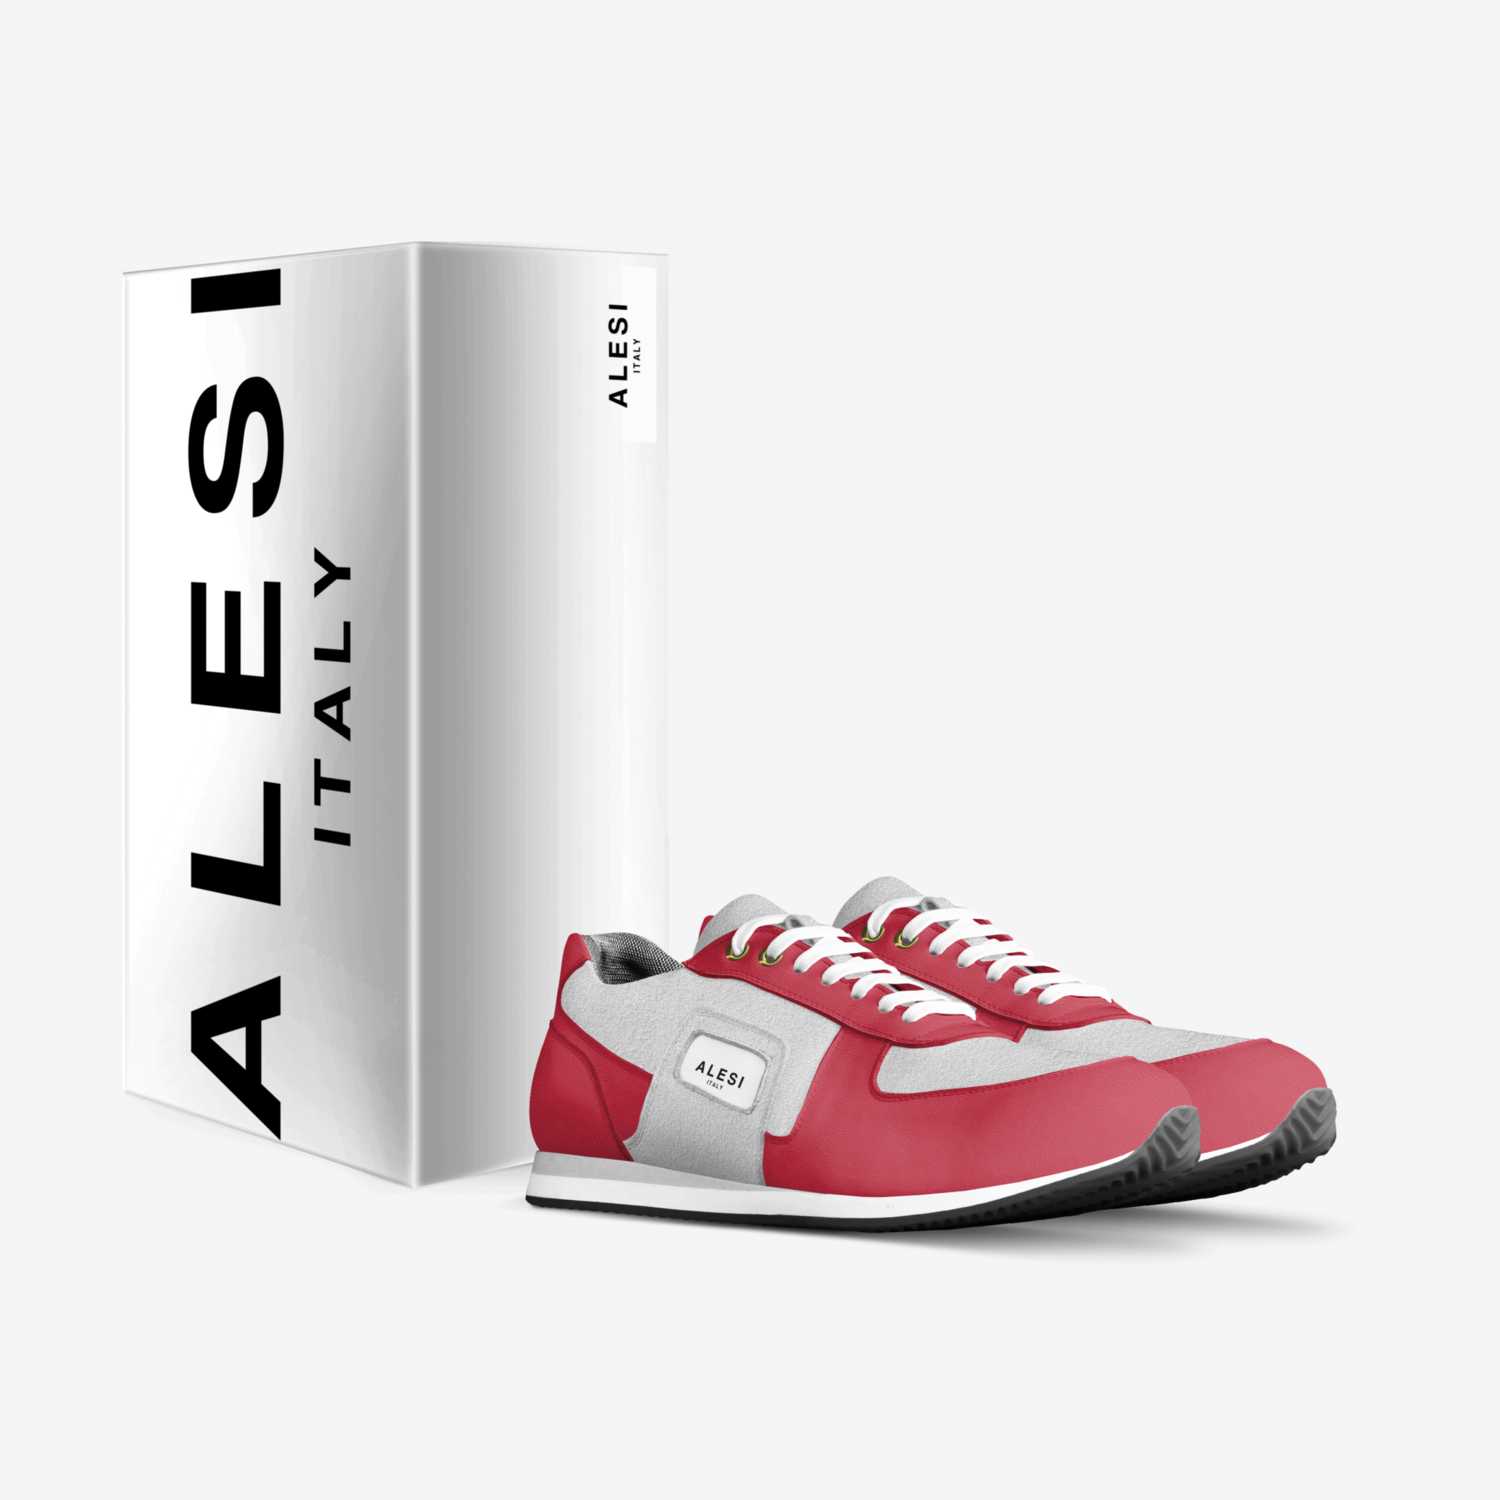 Alesi Runner custom made in Italy shoes by Lonanthony Parker | Box view